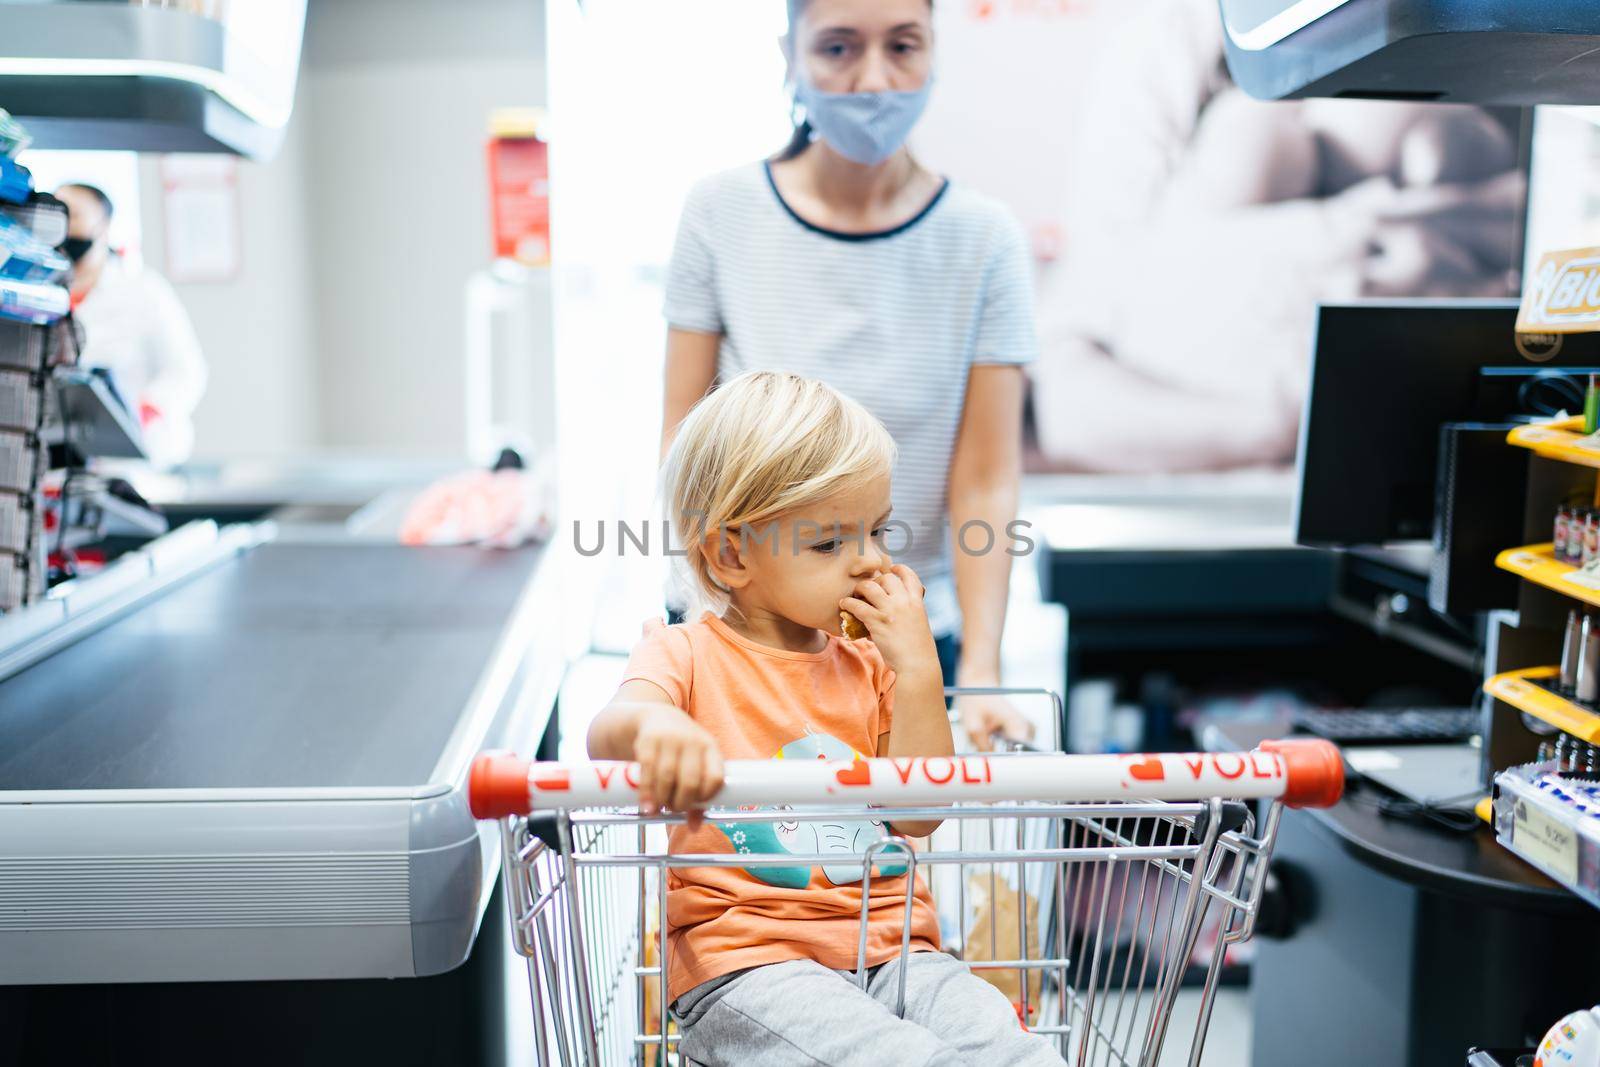 Budva, Montenegro - 17 march 2021: Mom and daughter in a supermarket trolley at the store checkout. by Nadtochiy